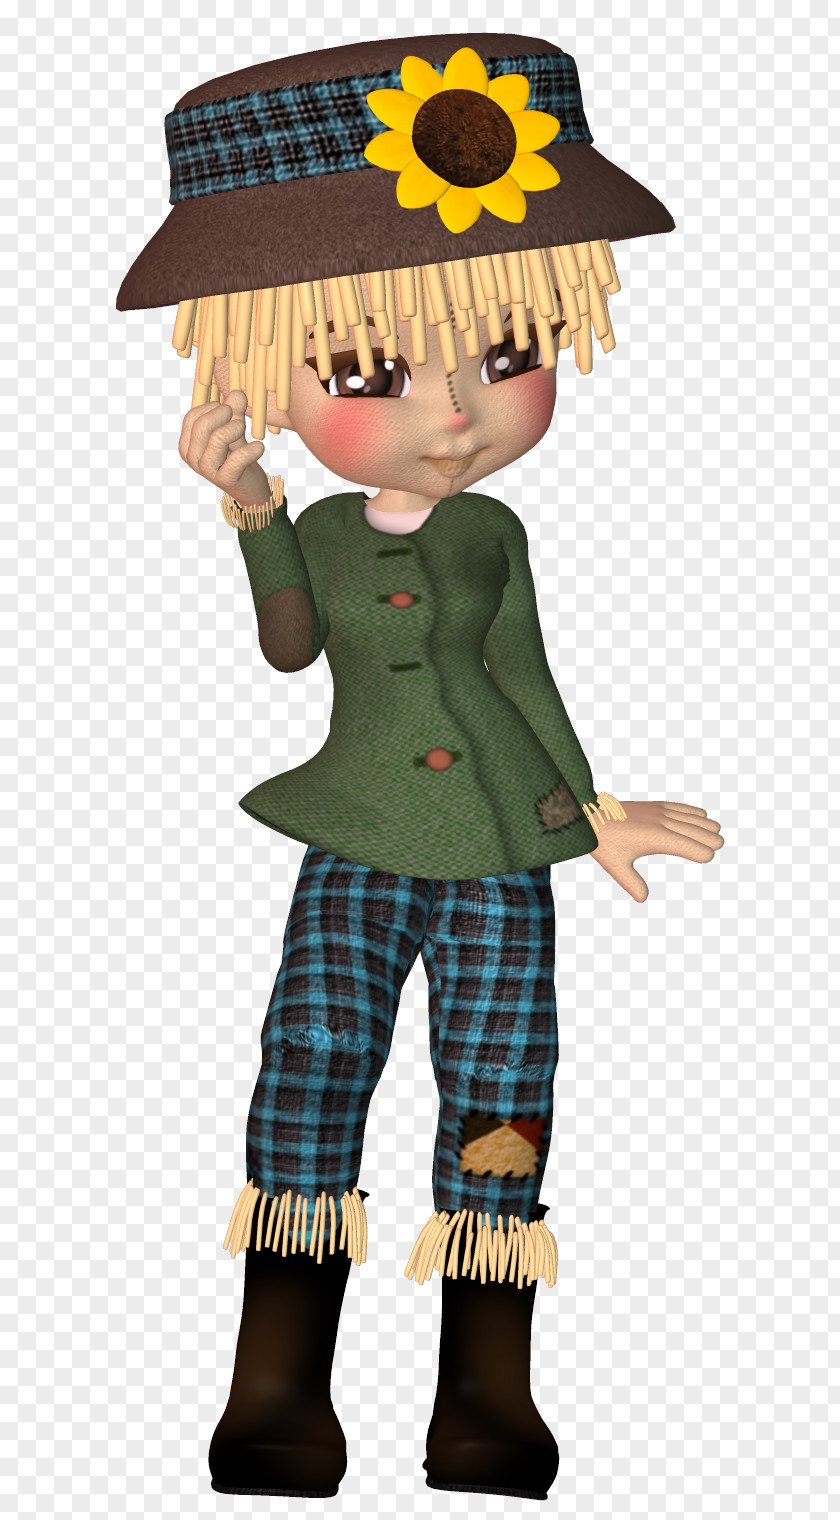 Toy Figurine Toddler Costume Character PNG